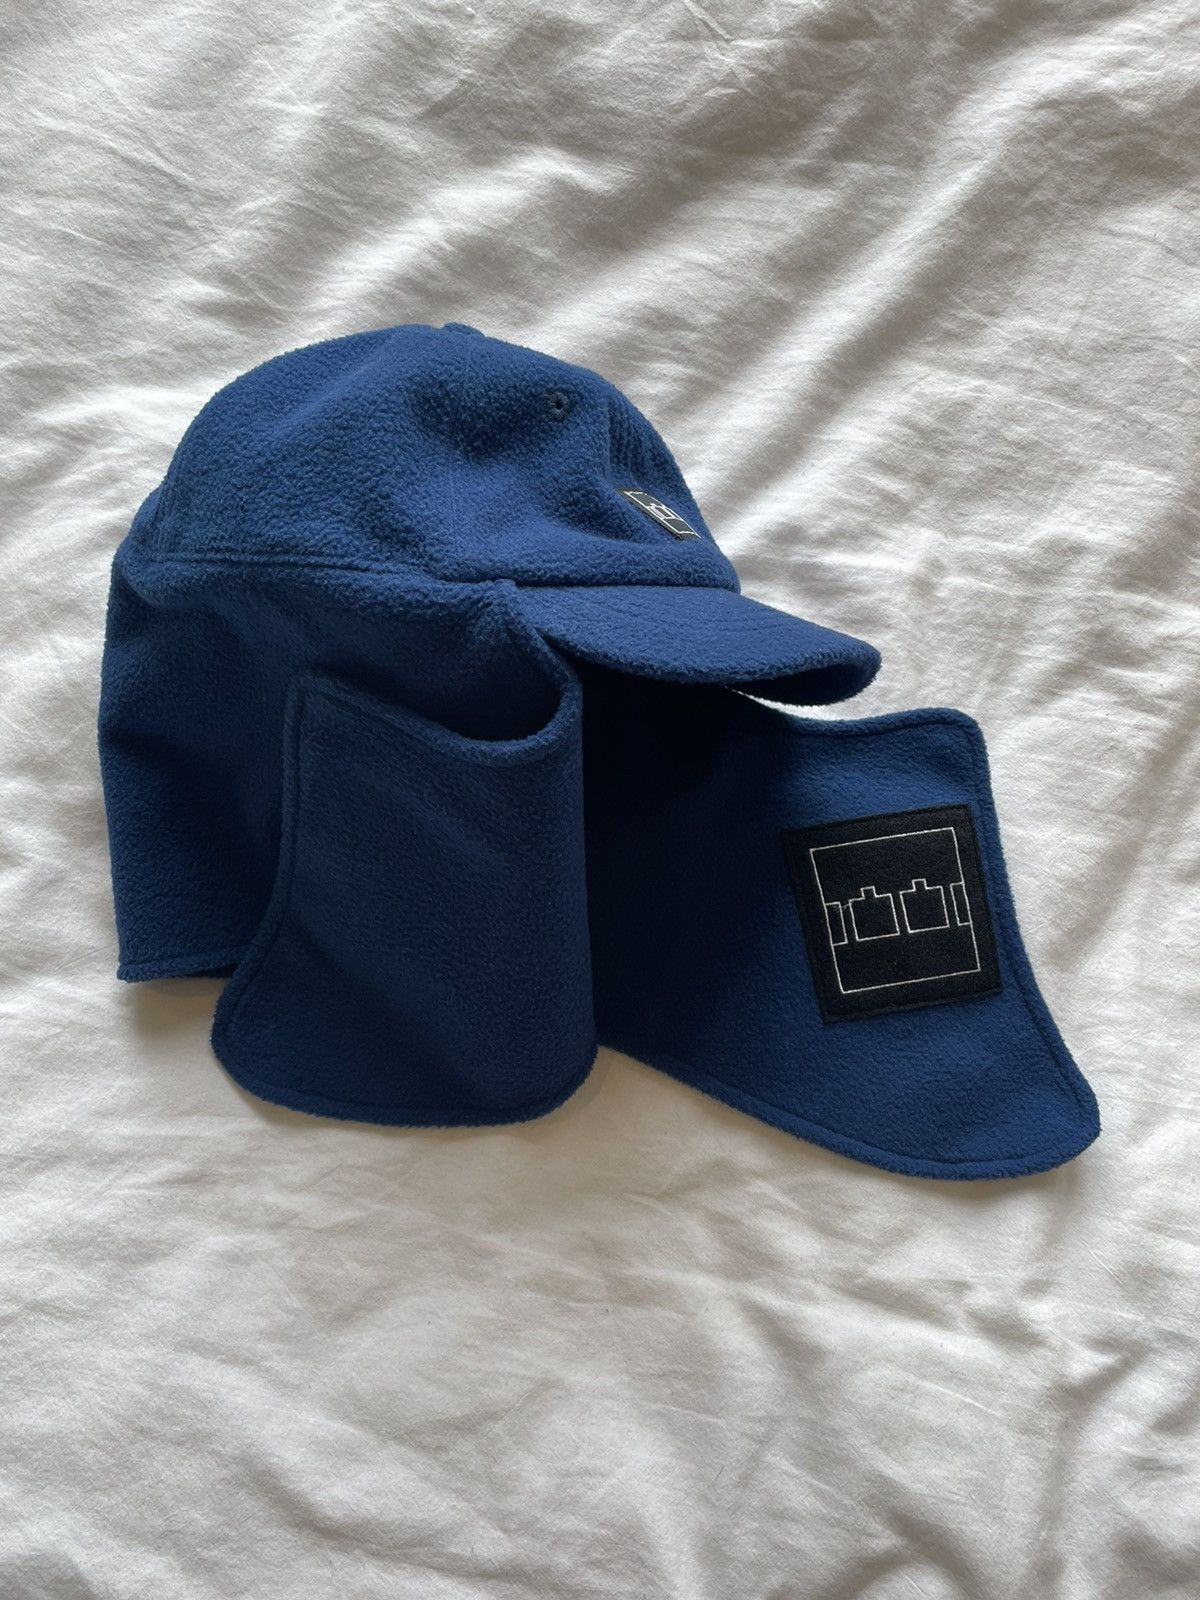 The Trilogy Tapes TTT Trilogy Tapes Balaclava Hat Blue | Grailed